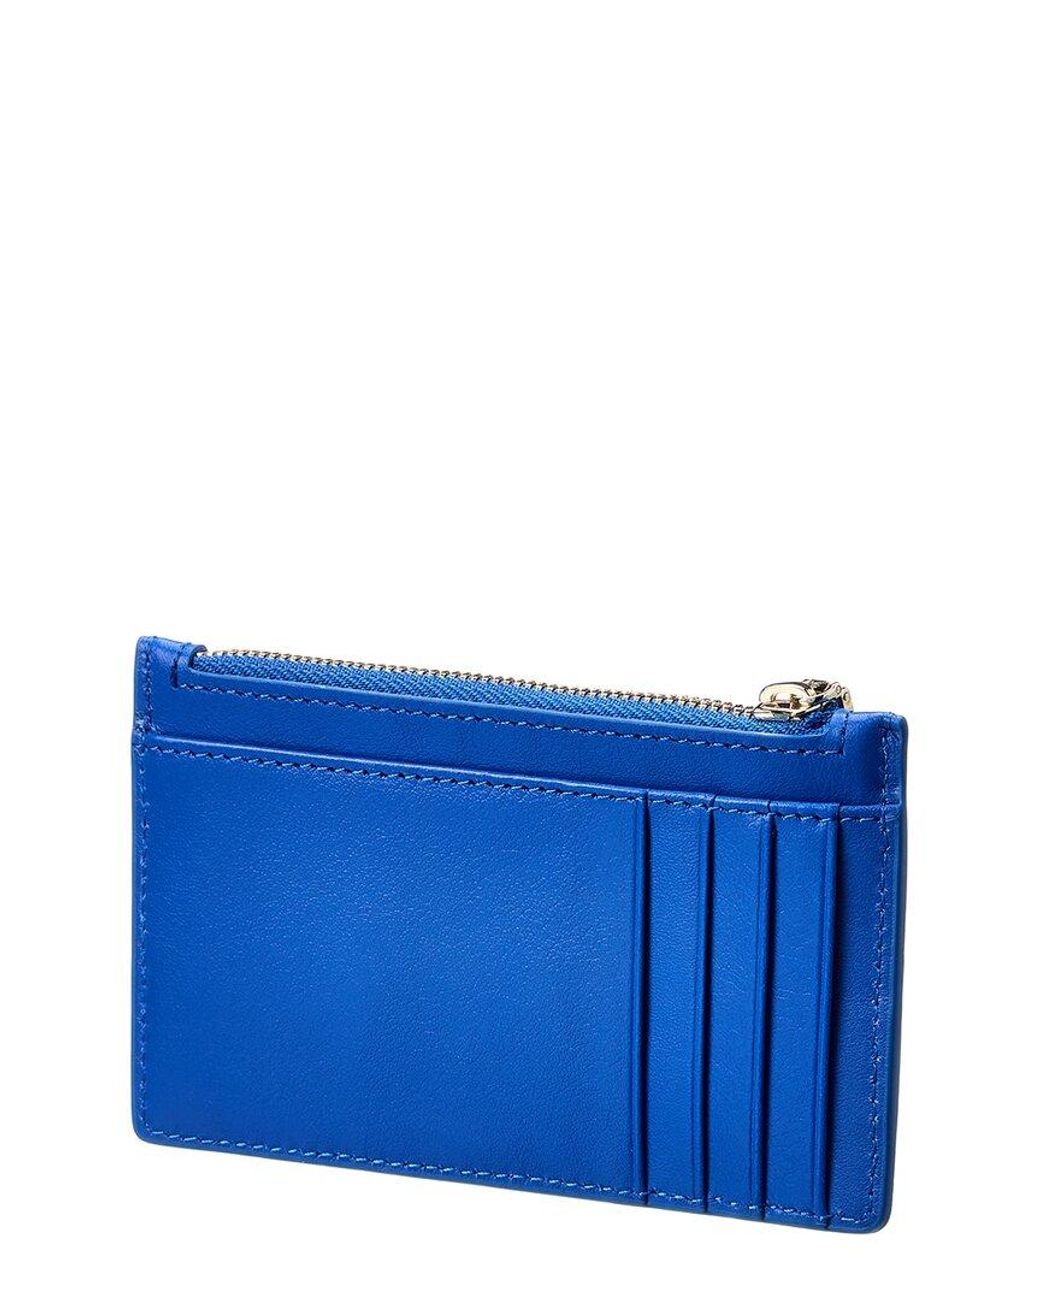 Ted Baker Garcia Zip Leather Card Holder in Blue | Lyst